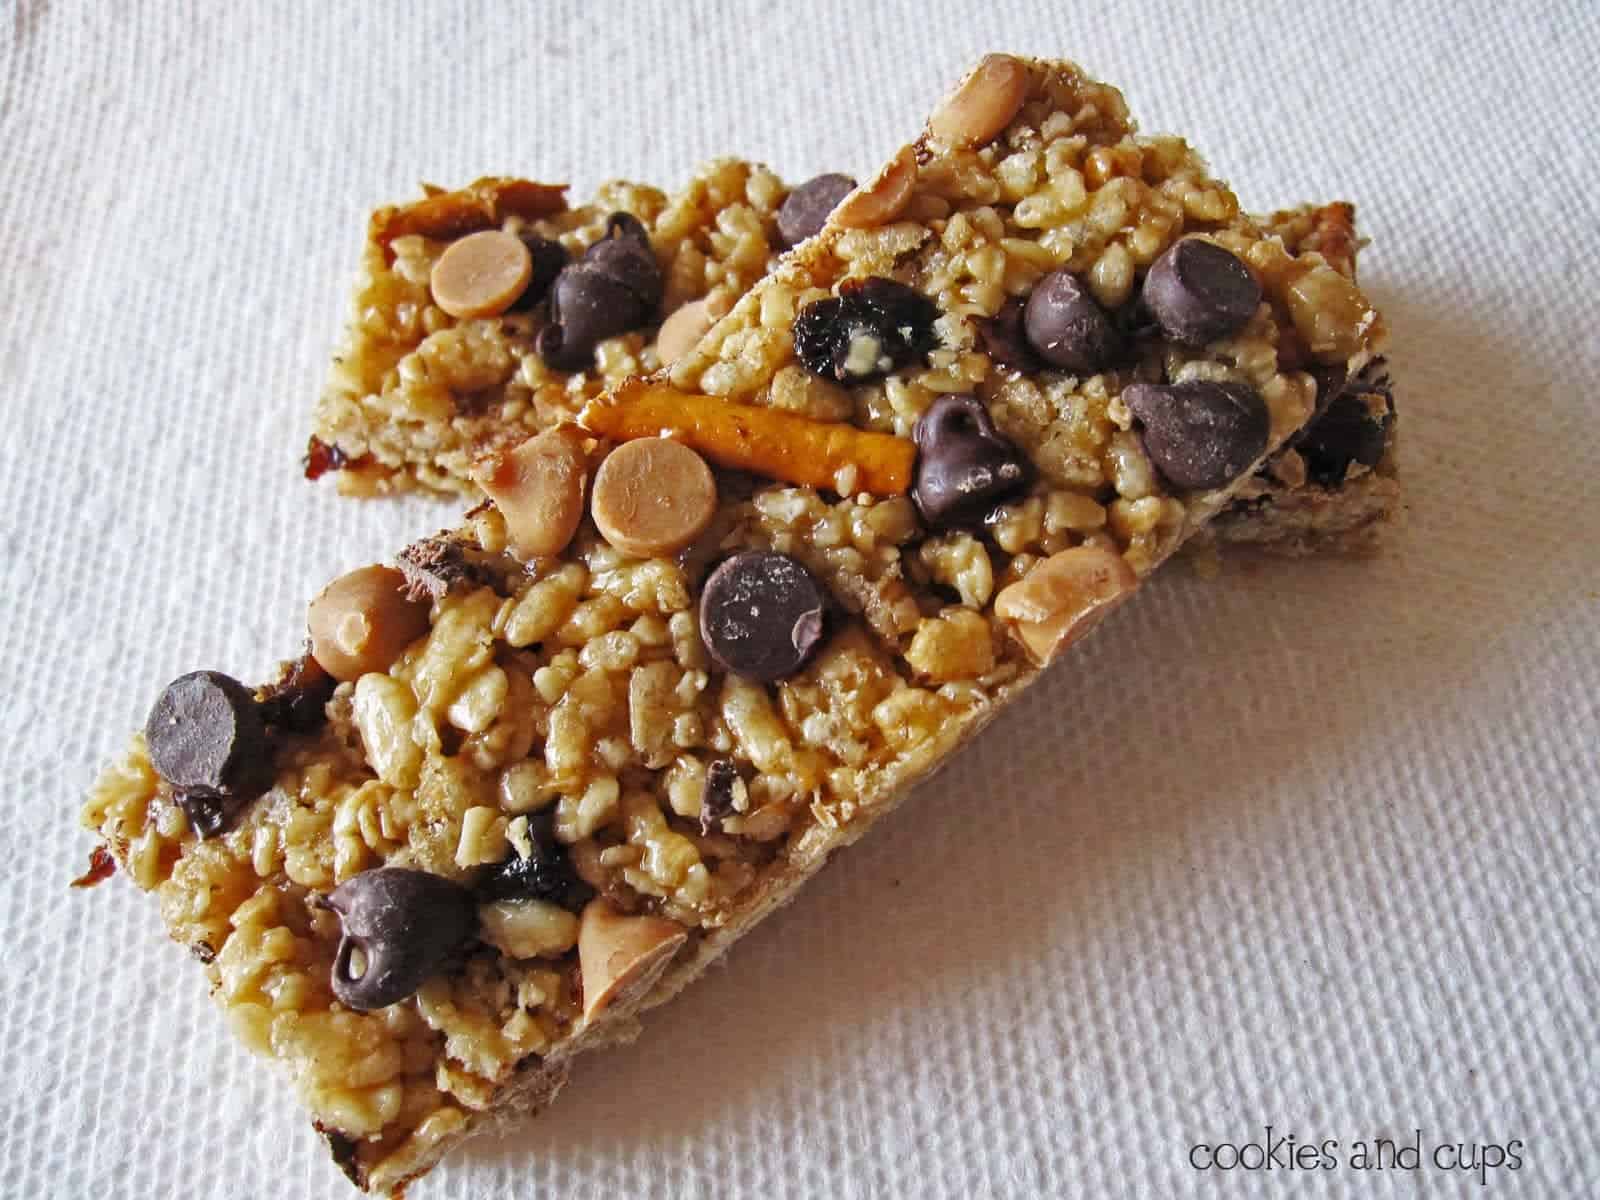 Overhead view of two homemade granola bars with chocolate chips and pretzels